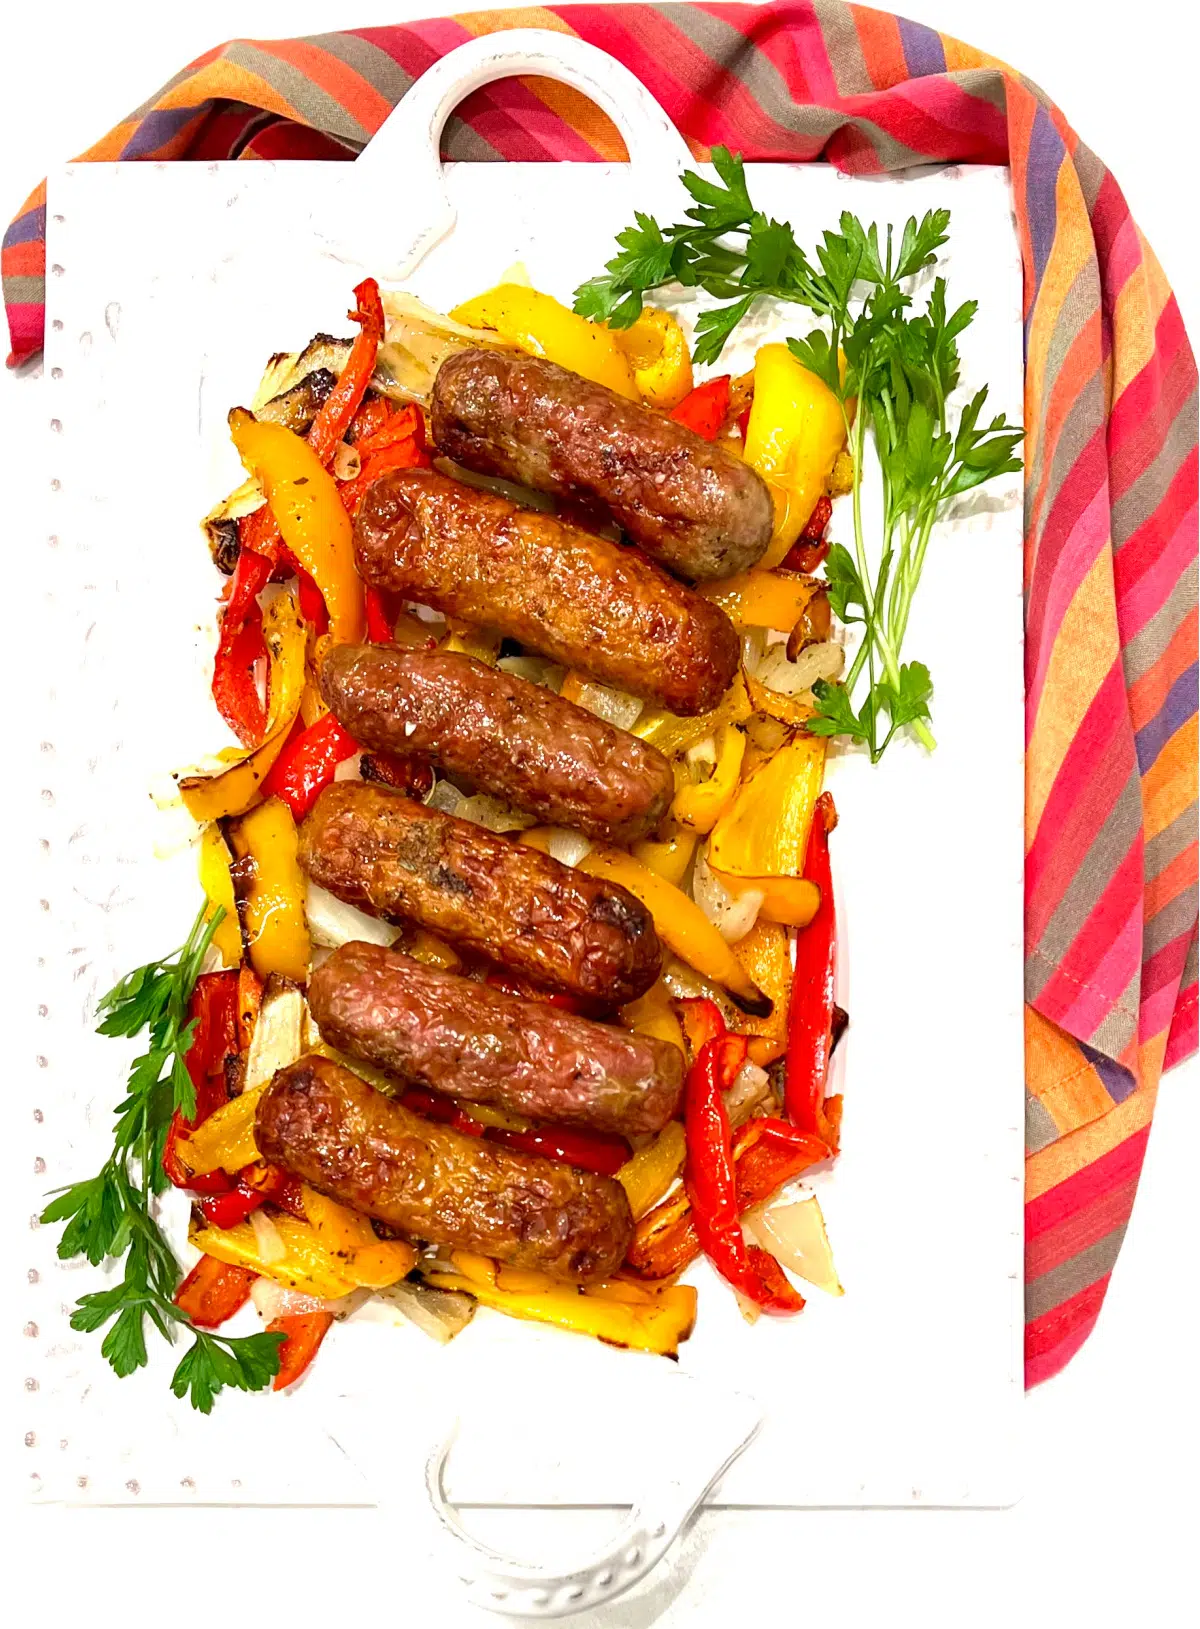 sausages and peppers on a serving platter